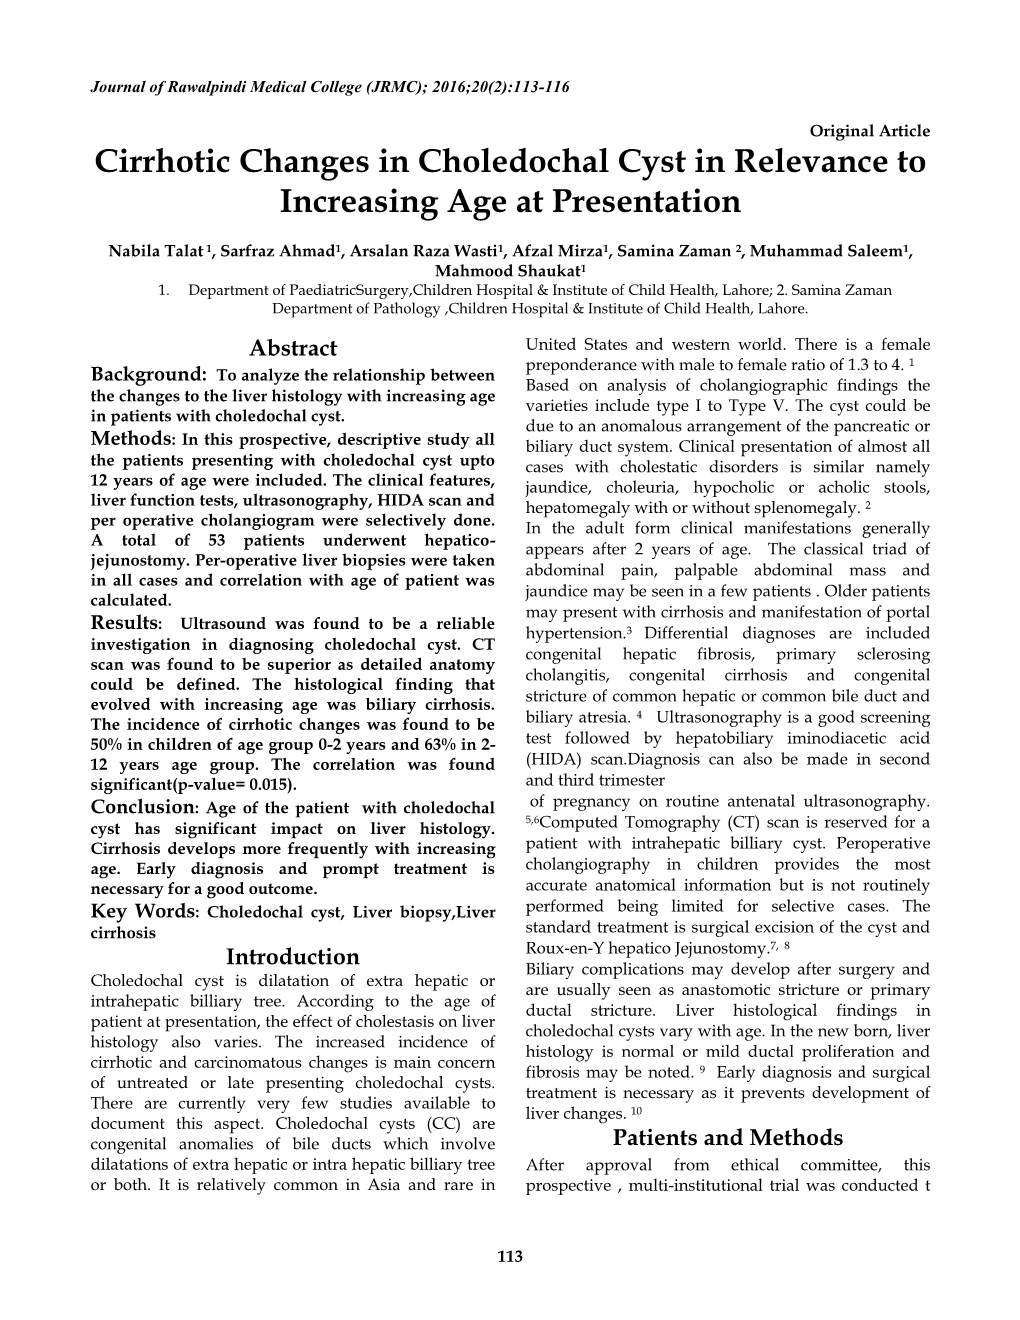 Cirrhotic Changes in Choledochal Cyst in Relevance to Increasing Age at Presentation